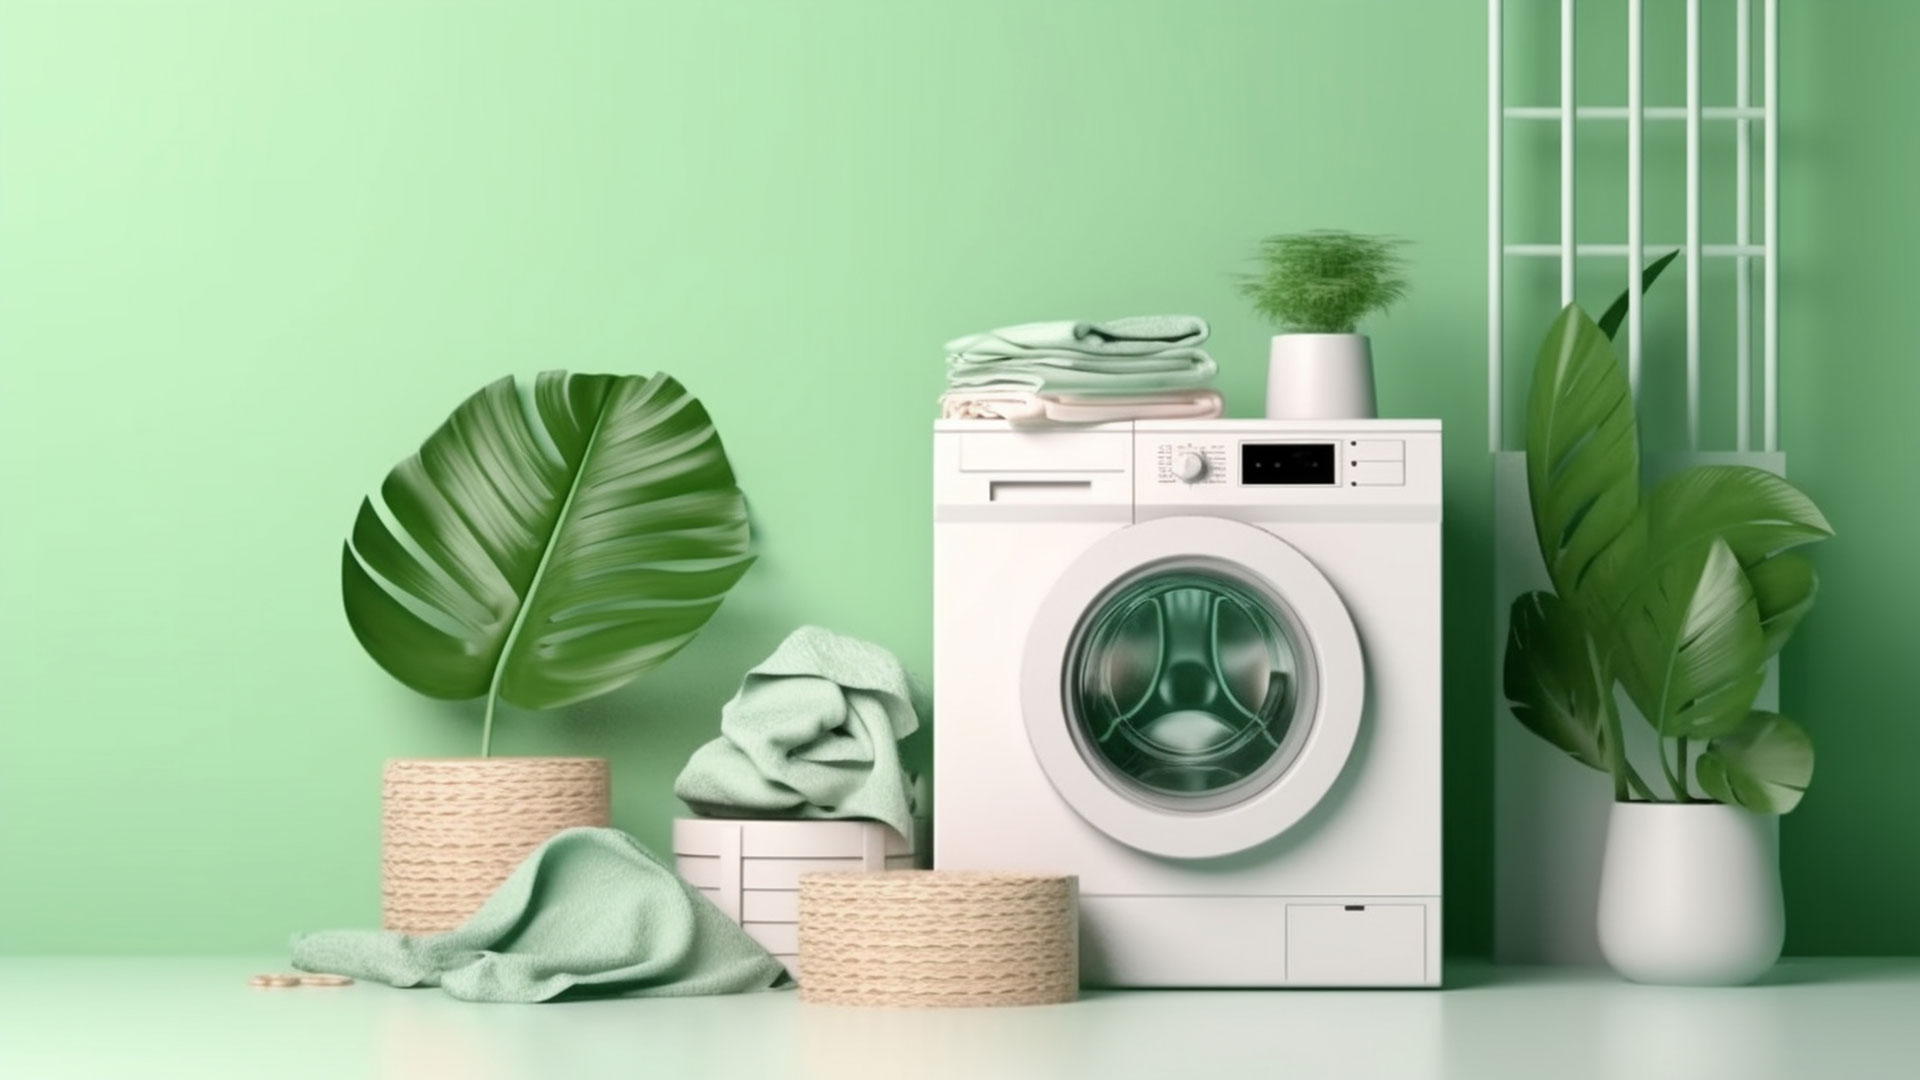 Washing machine in a room with green walls, surrounded by houseplants